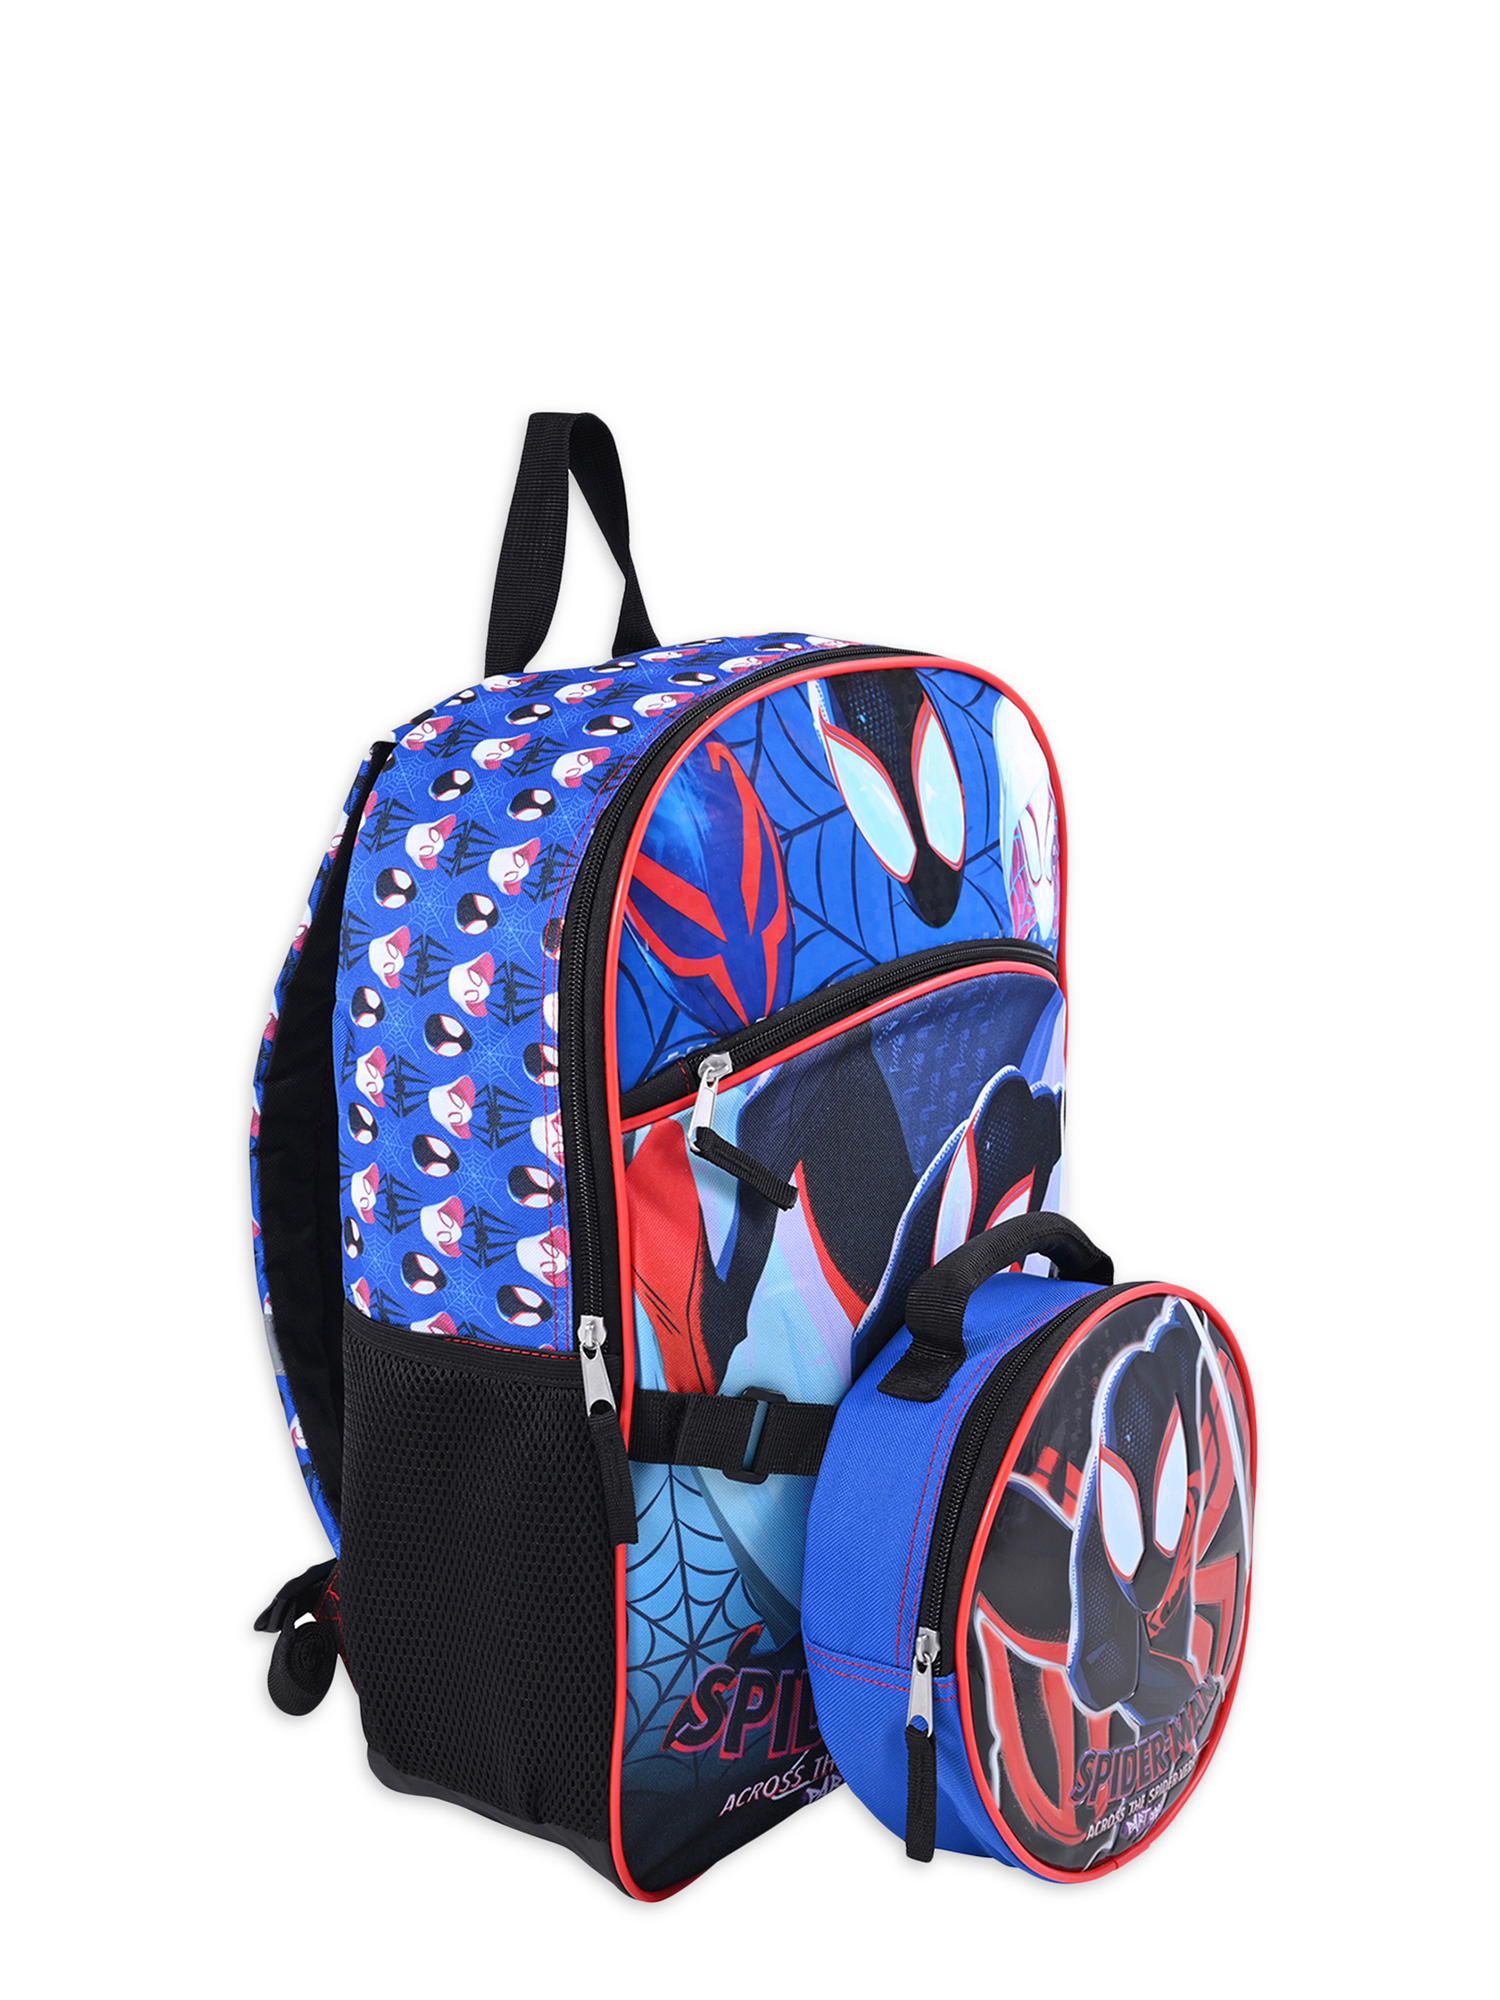 Marvel Spider-Man Across the Spider-Verse Boys 17" Laptop Backpack 2-Piece Set with Lunch Bag, Black Blue - image 5 of 9